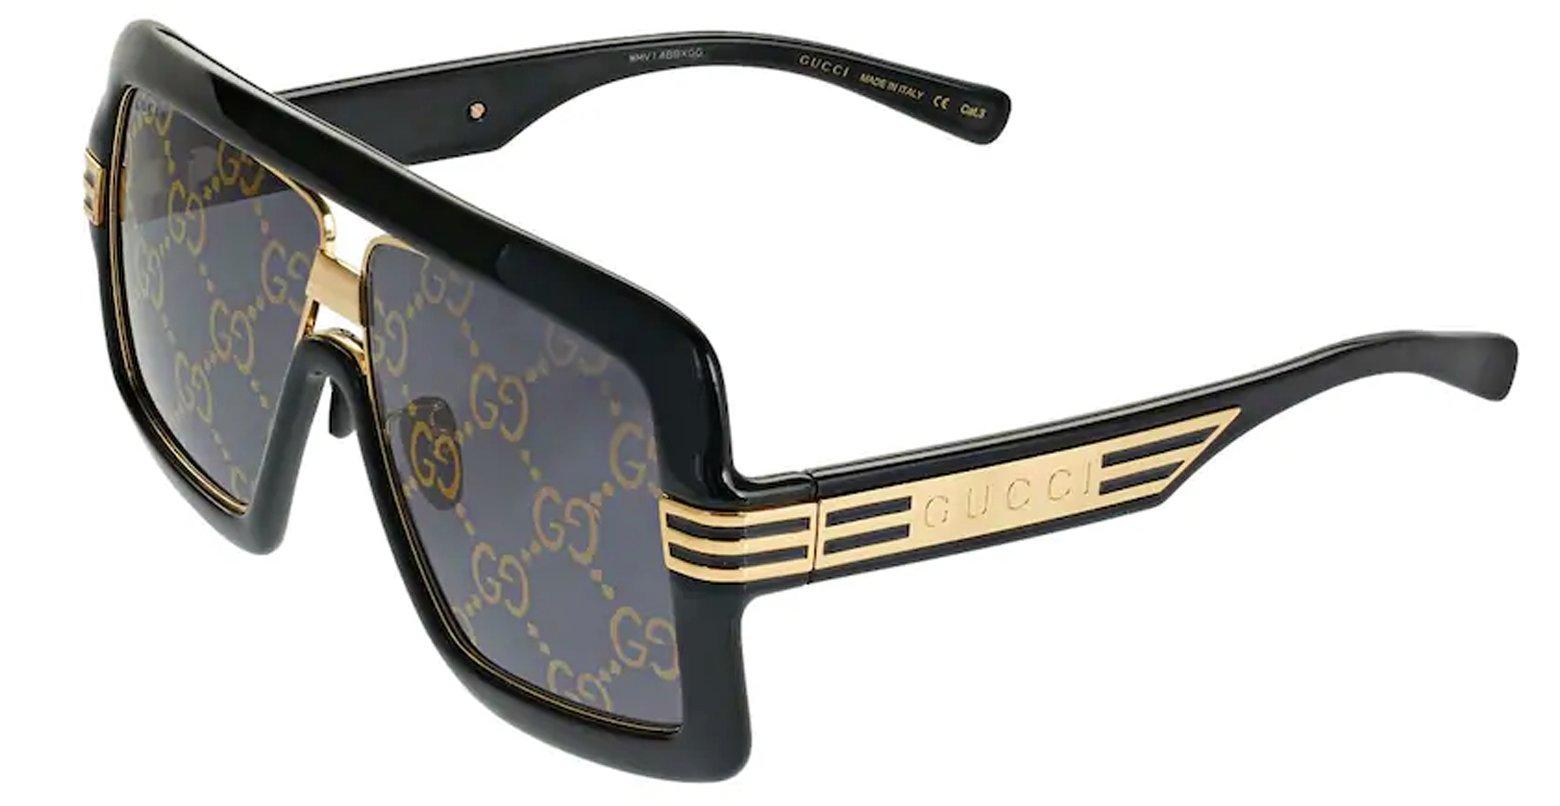 Gucci Black/Grey Black Acetate and Gold Metal Oversized Men's Sunglasses at FORZIERI